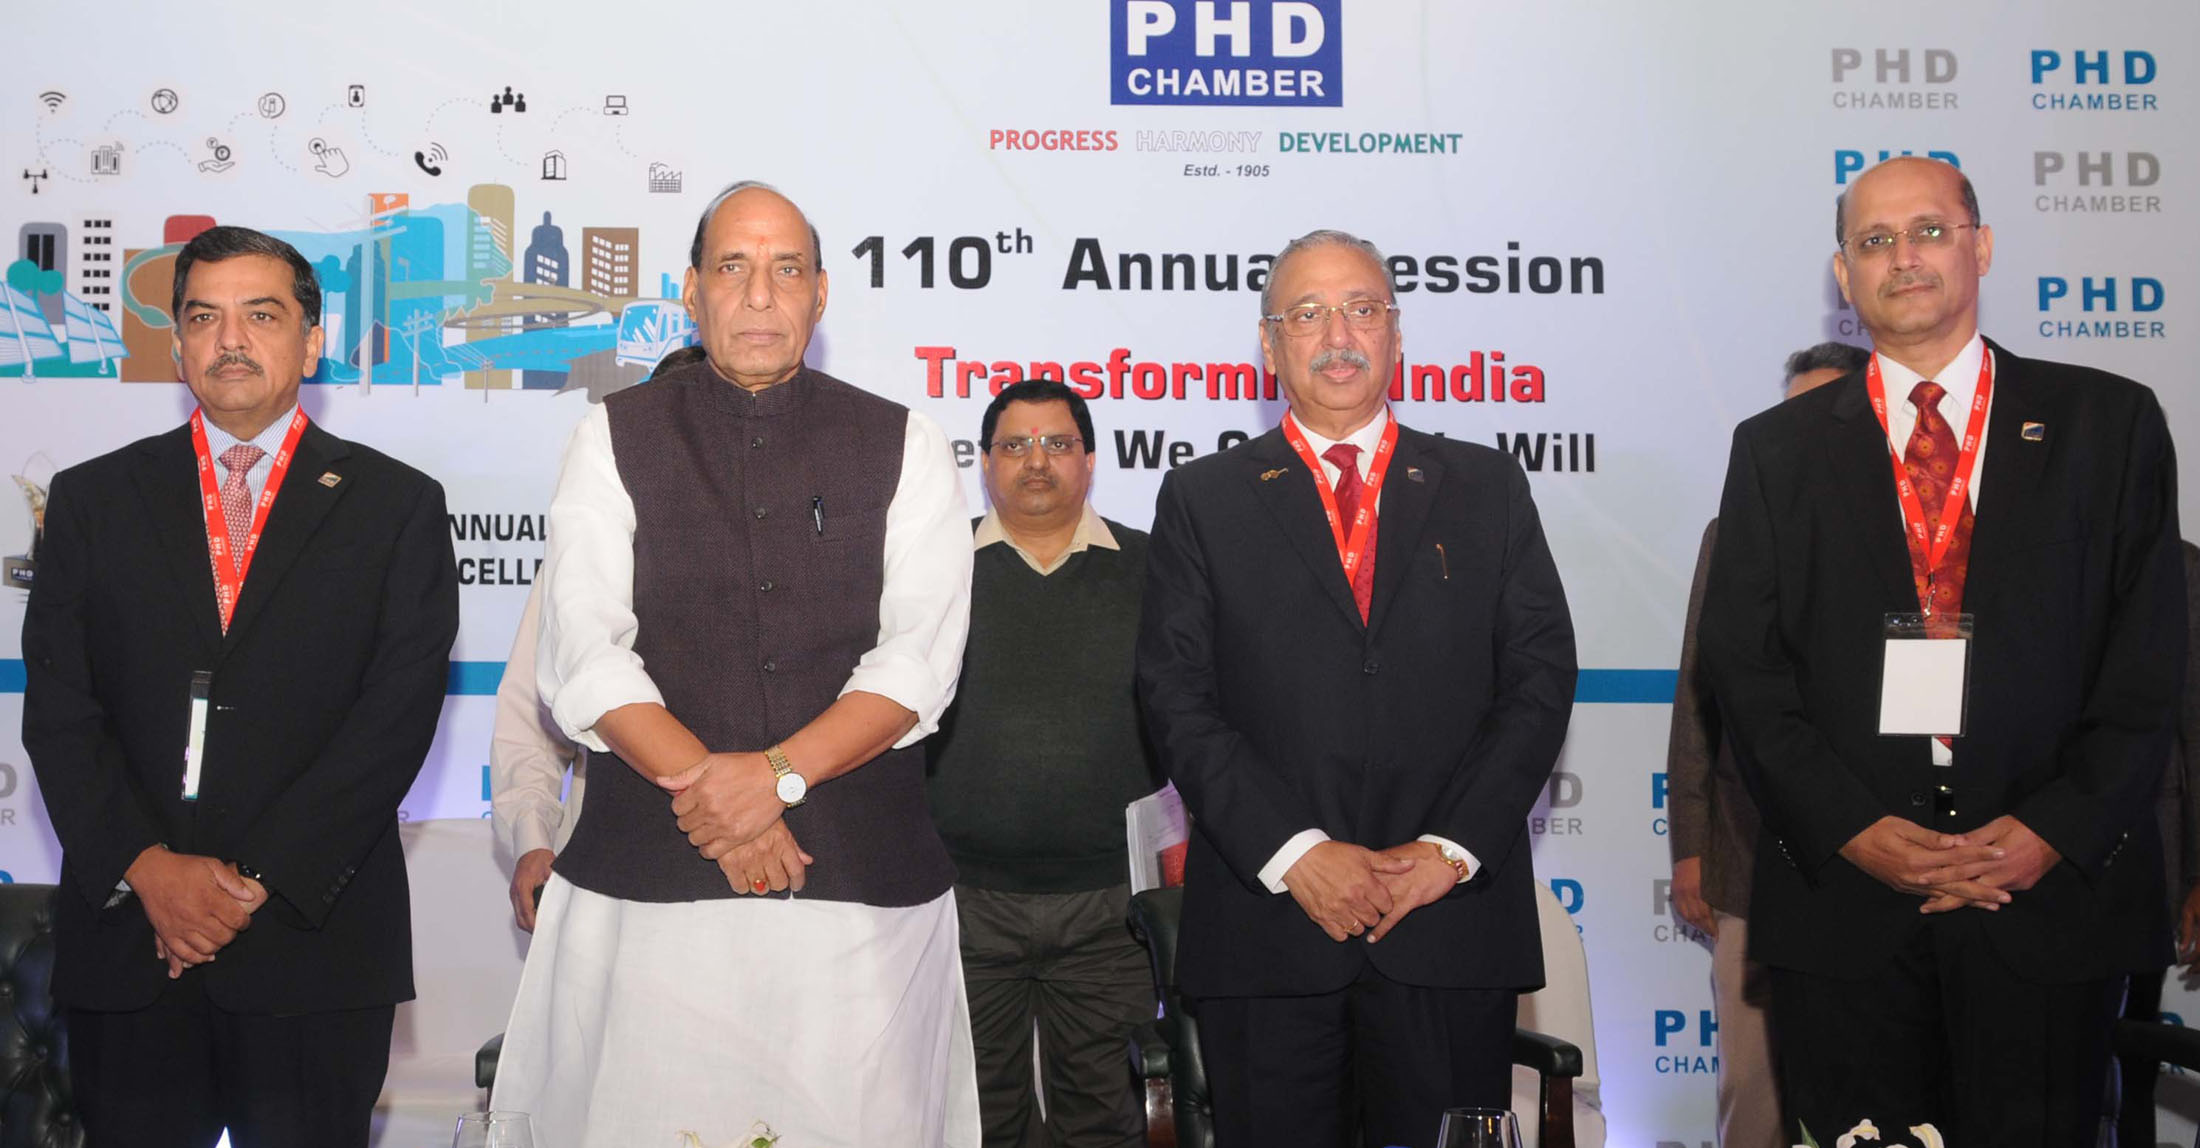 The Union Home Minister, Shri Rajnath Singh at the inauguration of the 110th Annual Session of the PHD Chamber and PHD Annual Awards for Excellence  2015 function, in New Delhi on November 28, 2015.